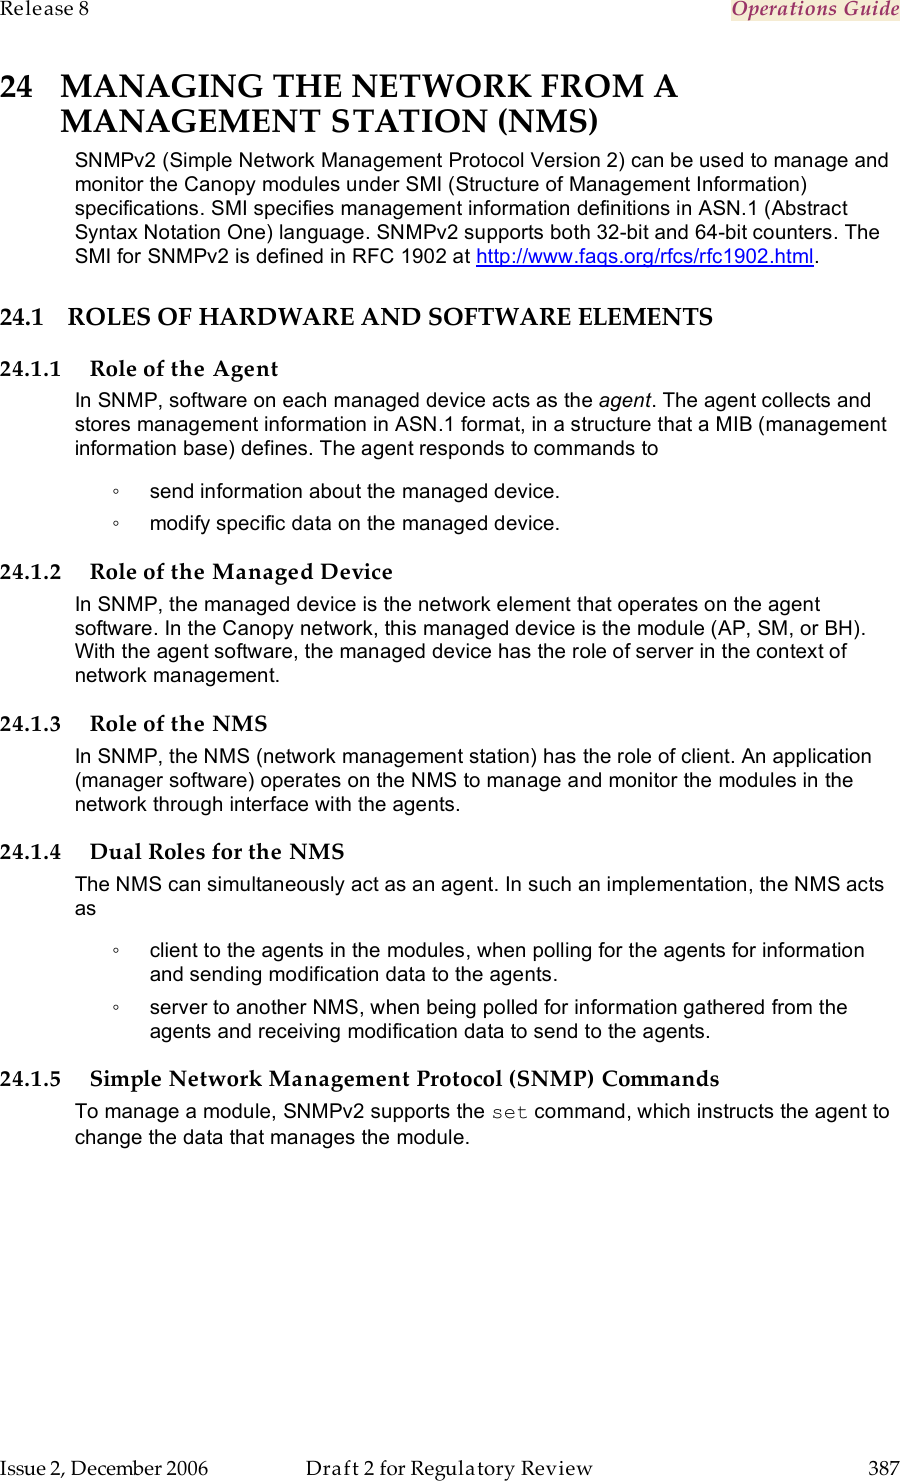 Release 8    Operations Guide   Issue 2, December 2006  Draft 2 for Regulatory Review  387     24 MANAGING THE NETWORK FROM A MANAGEMENT STATION (NMS) SNMPv2 (Simple Network Management Protocol Version 2) can be used to manage and monitor the Canopy modules under SMI (Structure of Management Information) specifications. SMI specifies management information definitions in ASN.1 (Abstract Syntax Notation One) language. SNMPv2 supports both 32-bit and 64-bit counters. The SMI for SNMPv2 is defined in RFC 1902 at http://www.faqs.org/rfcs/rfc1902.html. 24.1 ROLES OF HARDWARE AND SOFTWARE ELEMENTS 24.1.1 Role of the Agent In SNMP, software on each managed device acts as the agent. The agent collects and stores management information in ASN.1 format, in a structure that a MIB (management information base) defines. The agent responds to commands to  ◦  send information about the managed device. ◦  modify specific data on the managed device. 24.1.2 Role of the Managed Device In SNMP, the managed device is the network element that operates on the agent software. In the Canopy network, this managed device is the module (AP, SM, or BH). With the agent software, the managed device has the role of server in the context of network management.  24.1.3 Role of the NMS In SNMP, the NMS (network management station) has the role of client. An application (manager software) operates on the NMS to manage and monitor the modules in the network through interface with the agents. 24.1.4 Dual Roles for the NMS The NMS can simultaneously act as an agent. In such an implementation, the NMS acts as  ◦  client to the agents in the modules, when polling for the agents for information and sending modification data to the agents.  ◦  server to another NMS, when being polled for information gathered from the agents and receiving modification data to send to the agents.  24.1.5 Simple Network Management Protocol (SNMP) Commands To manage a module, SNMPv2 supports the set command, which instructs the agent to change the data that manages the module. 